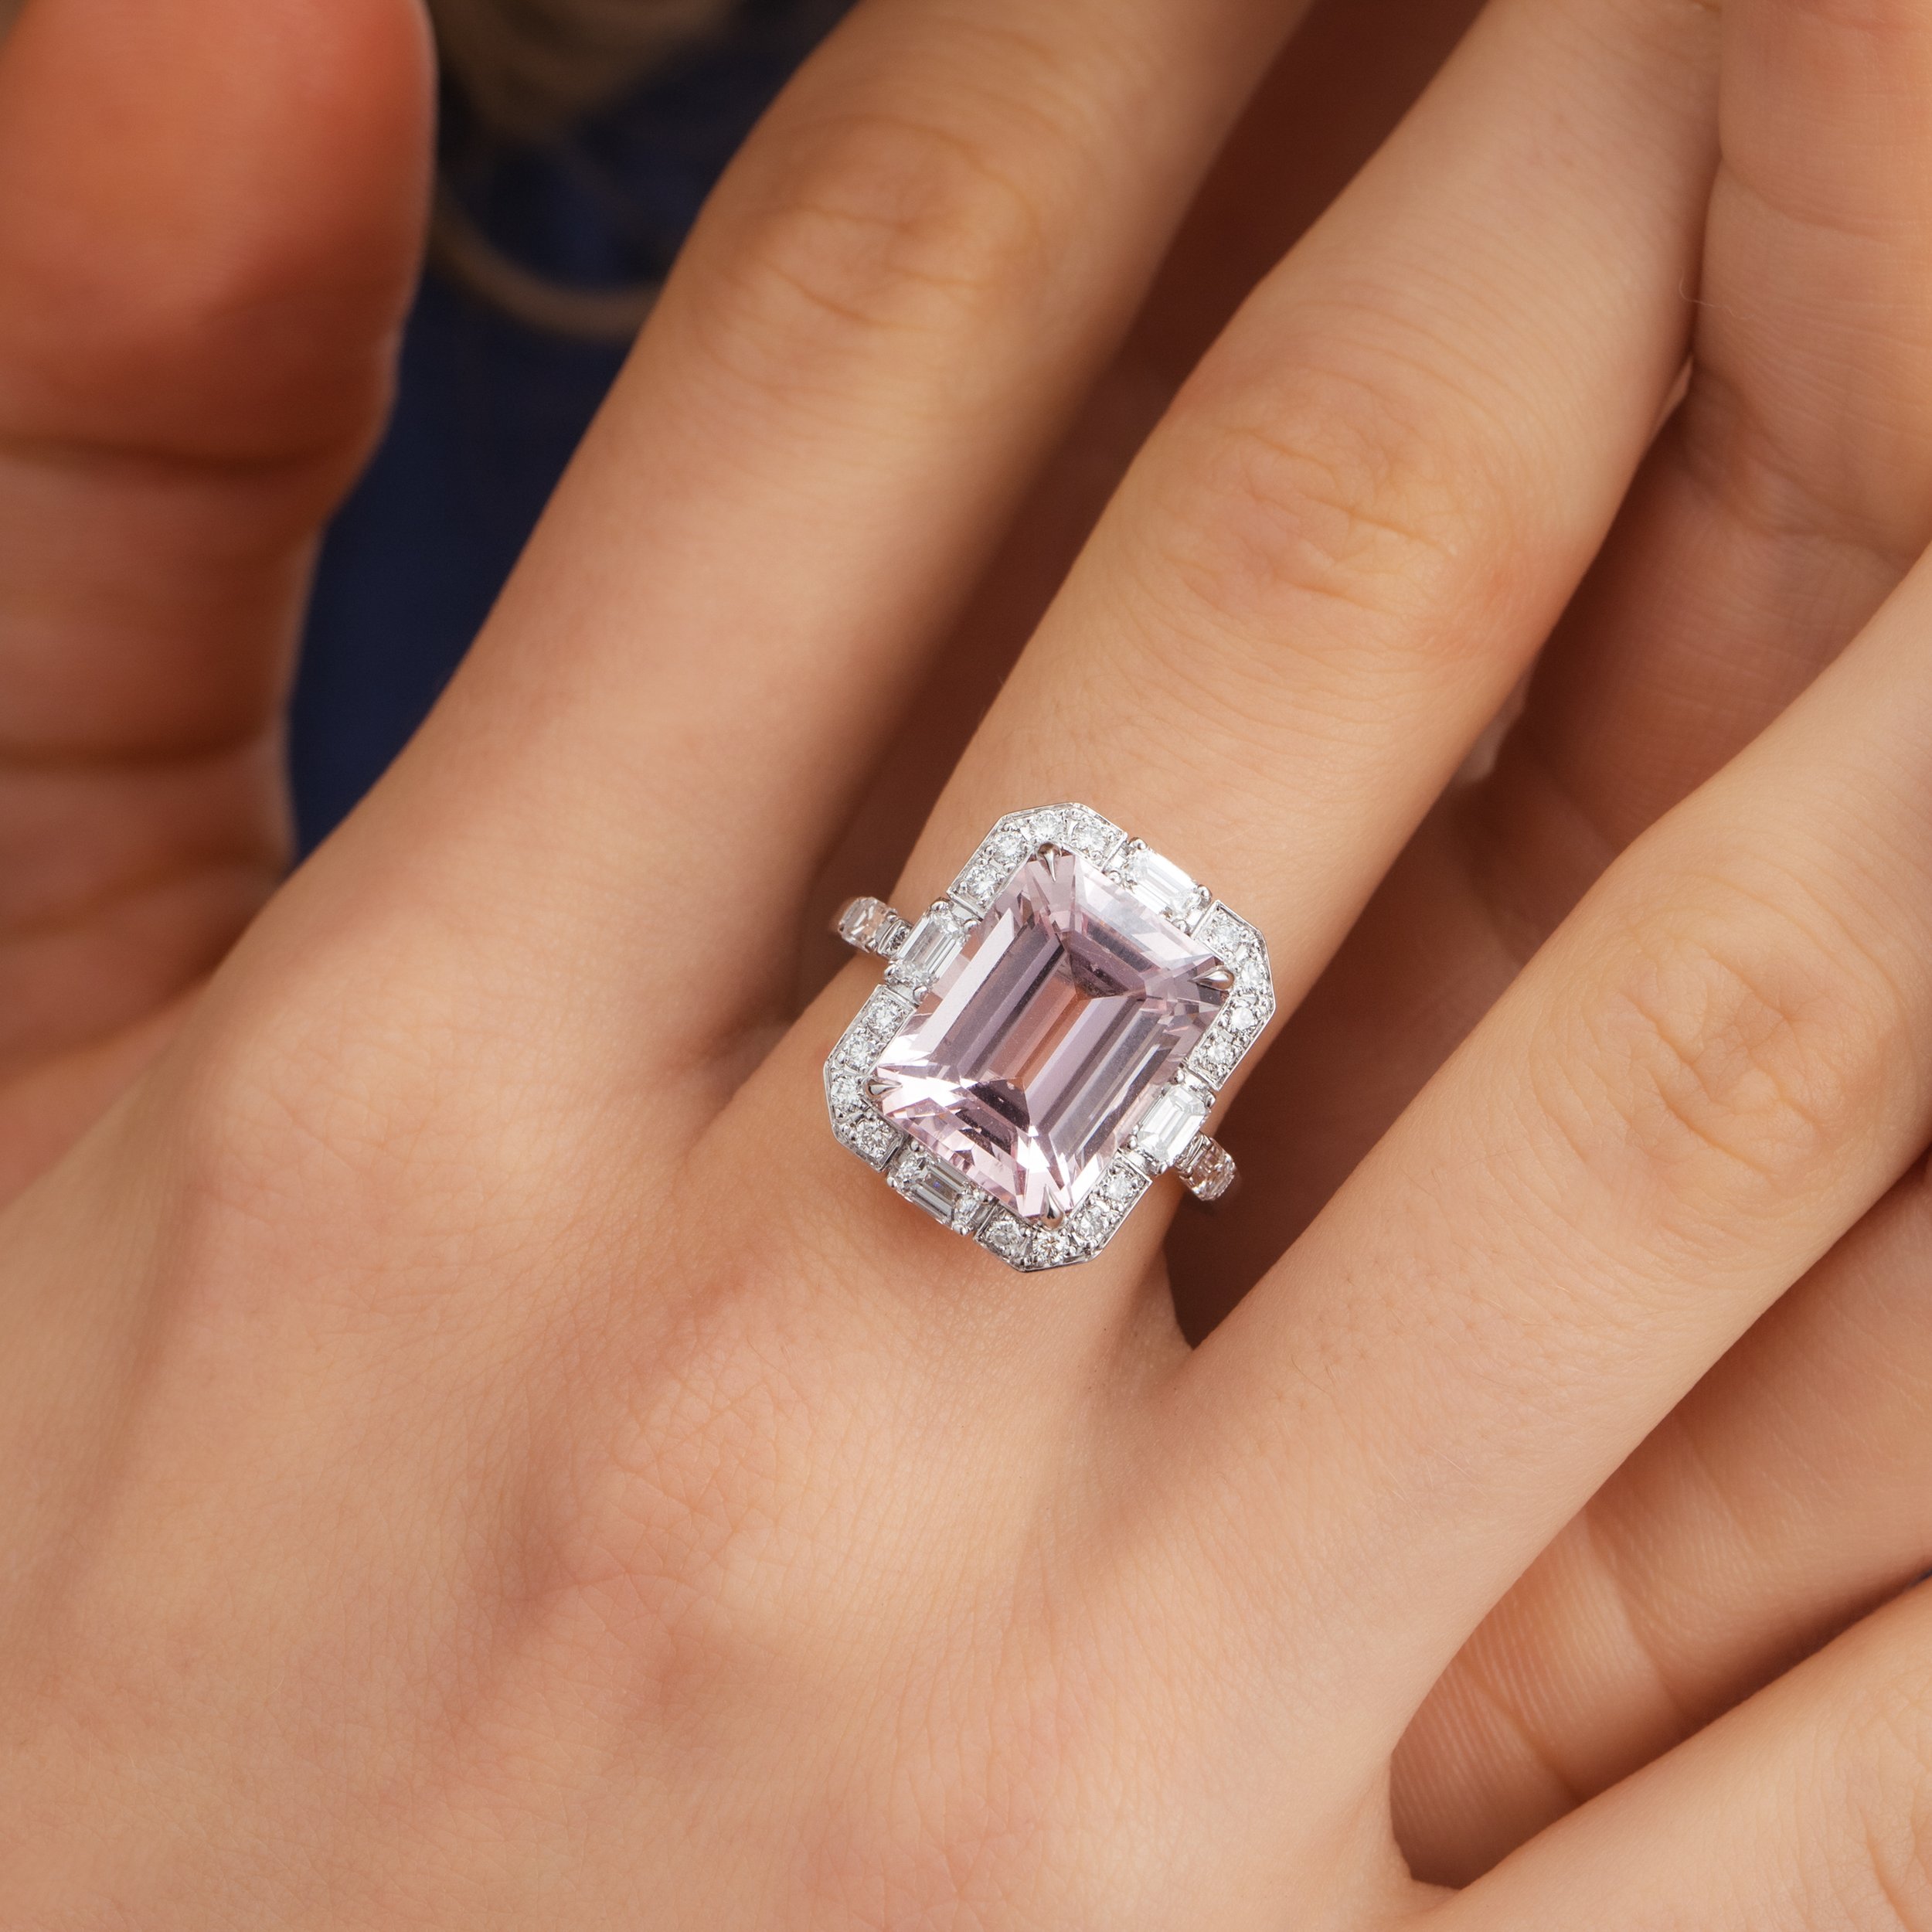   WIN AN EXQUISITE 18CT WHITE GOLD AND EMERALD-CUT MORGANITE RING   This exquisite Art Deco ring is hand crafted by award-winning jeweller Matthew Ely.   BUY YOUR DIAMOND RAFFLE TICKET HERE  